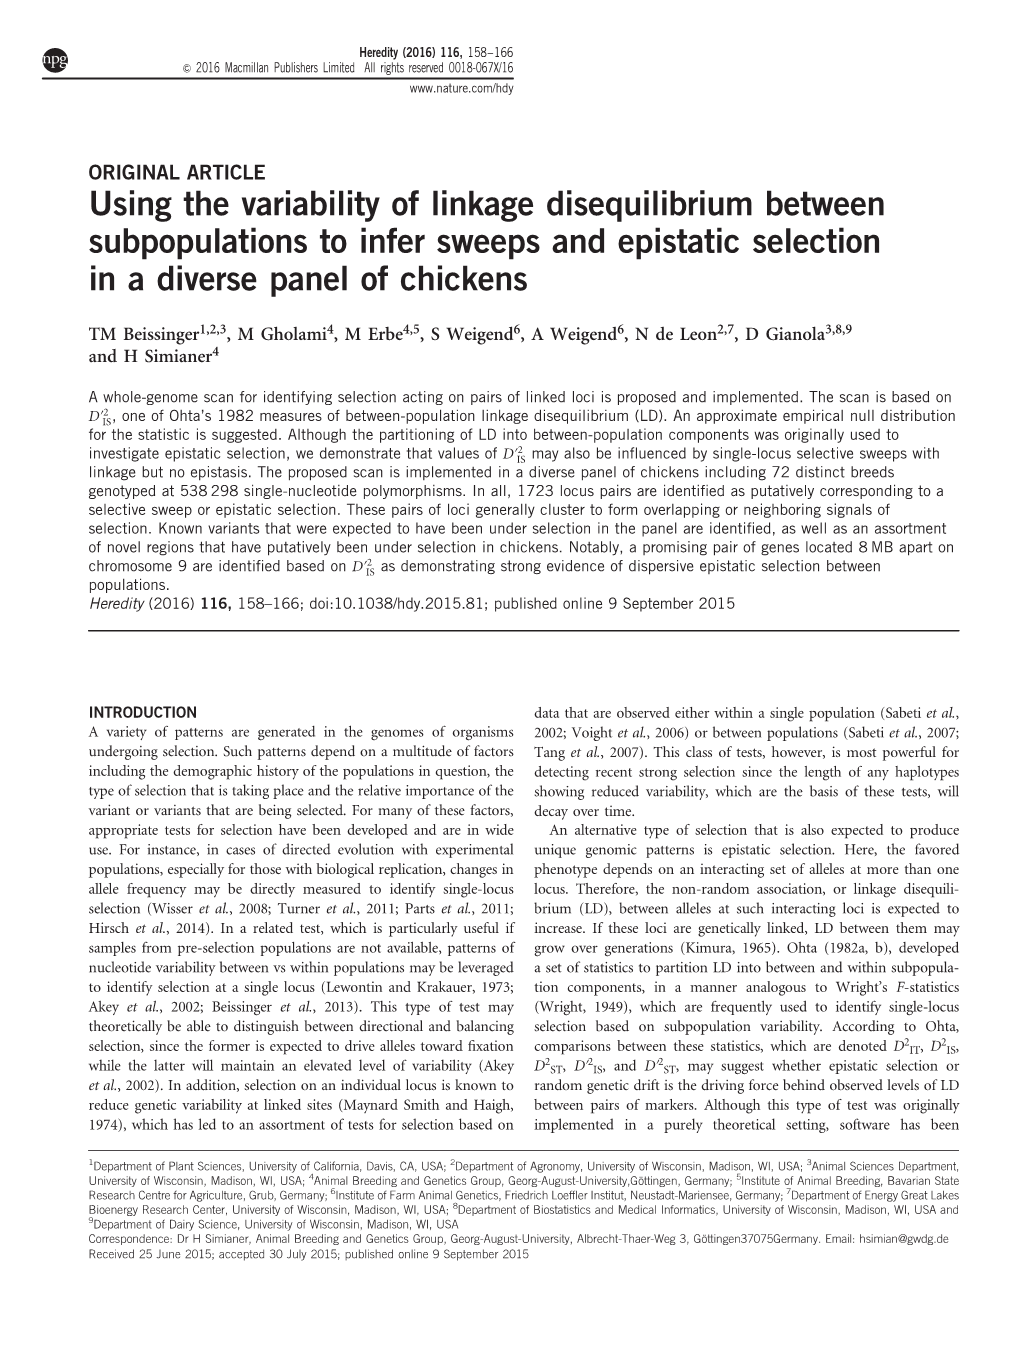 Using the Variability of Linkage Disequilibrium Between Subpopulations to Infer Sweeps and Epistatic Selection in a Diverse Panel of Chickens